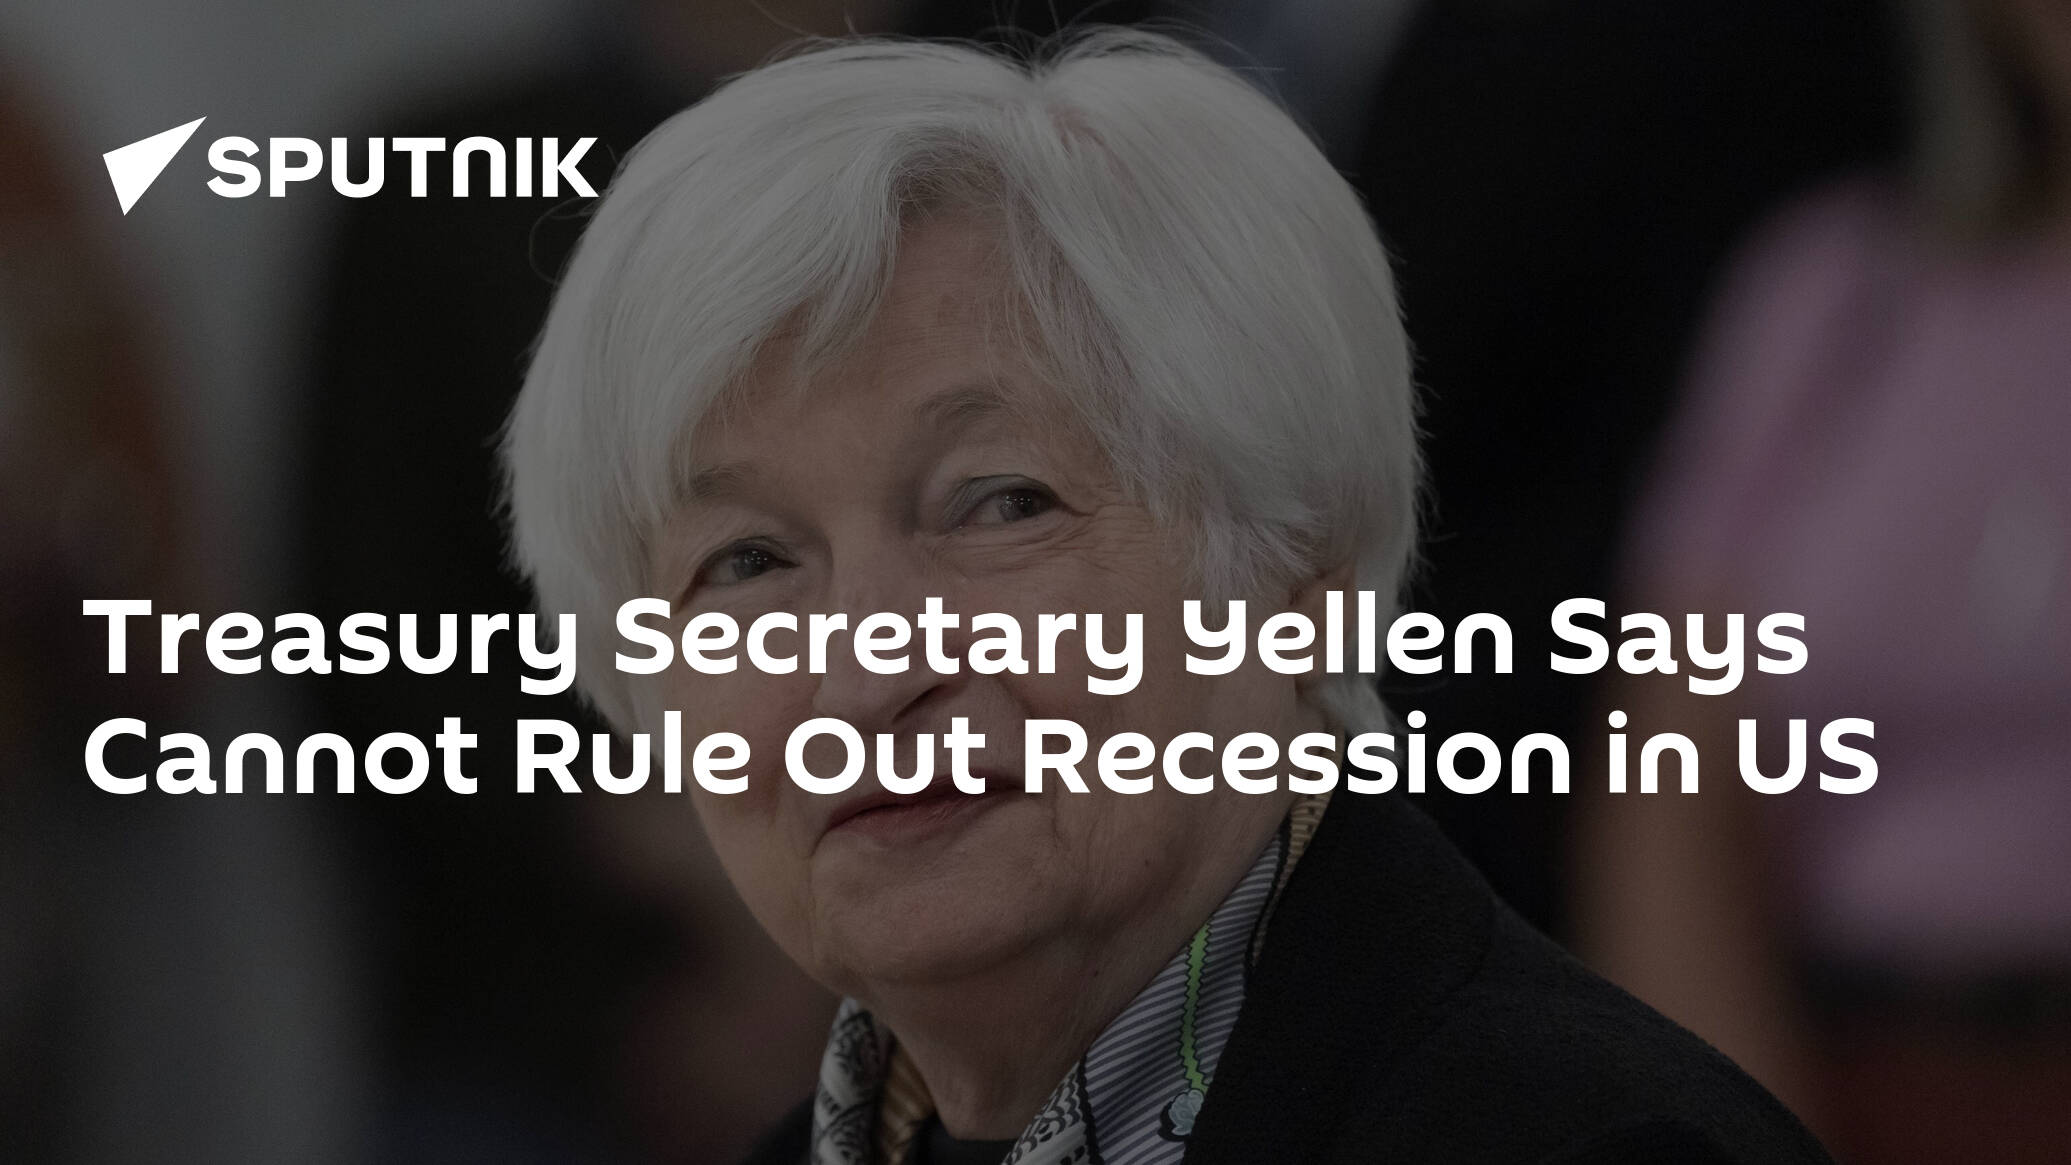 Treasury Secretary Yellen Says Cannot Rule Out Recession in US